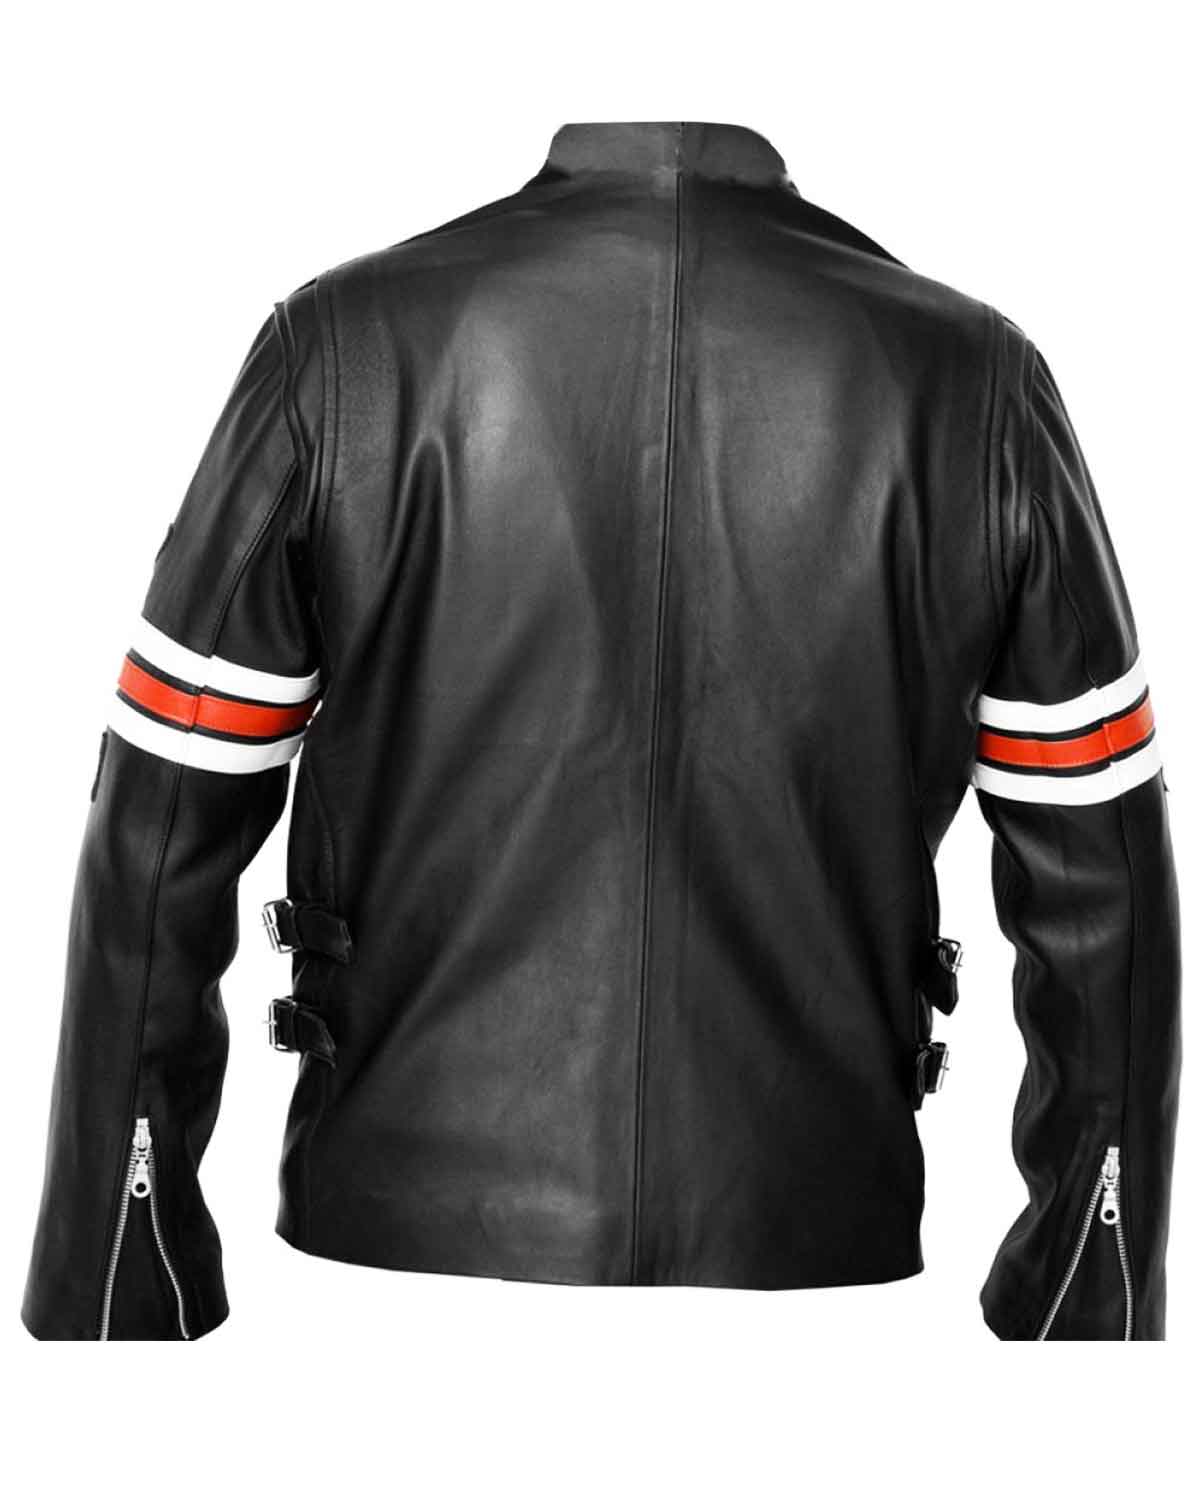 Elite House M.D. Gregory House Motorcycle Jacket